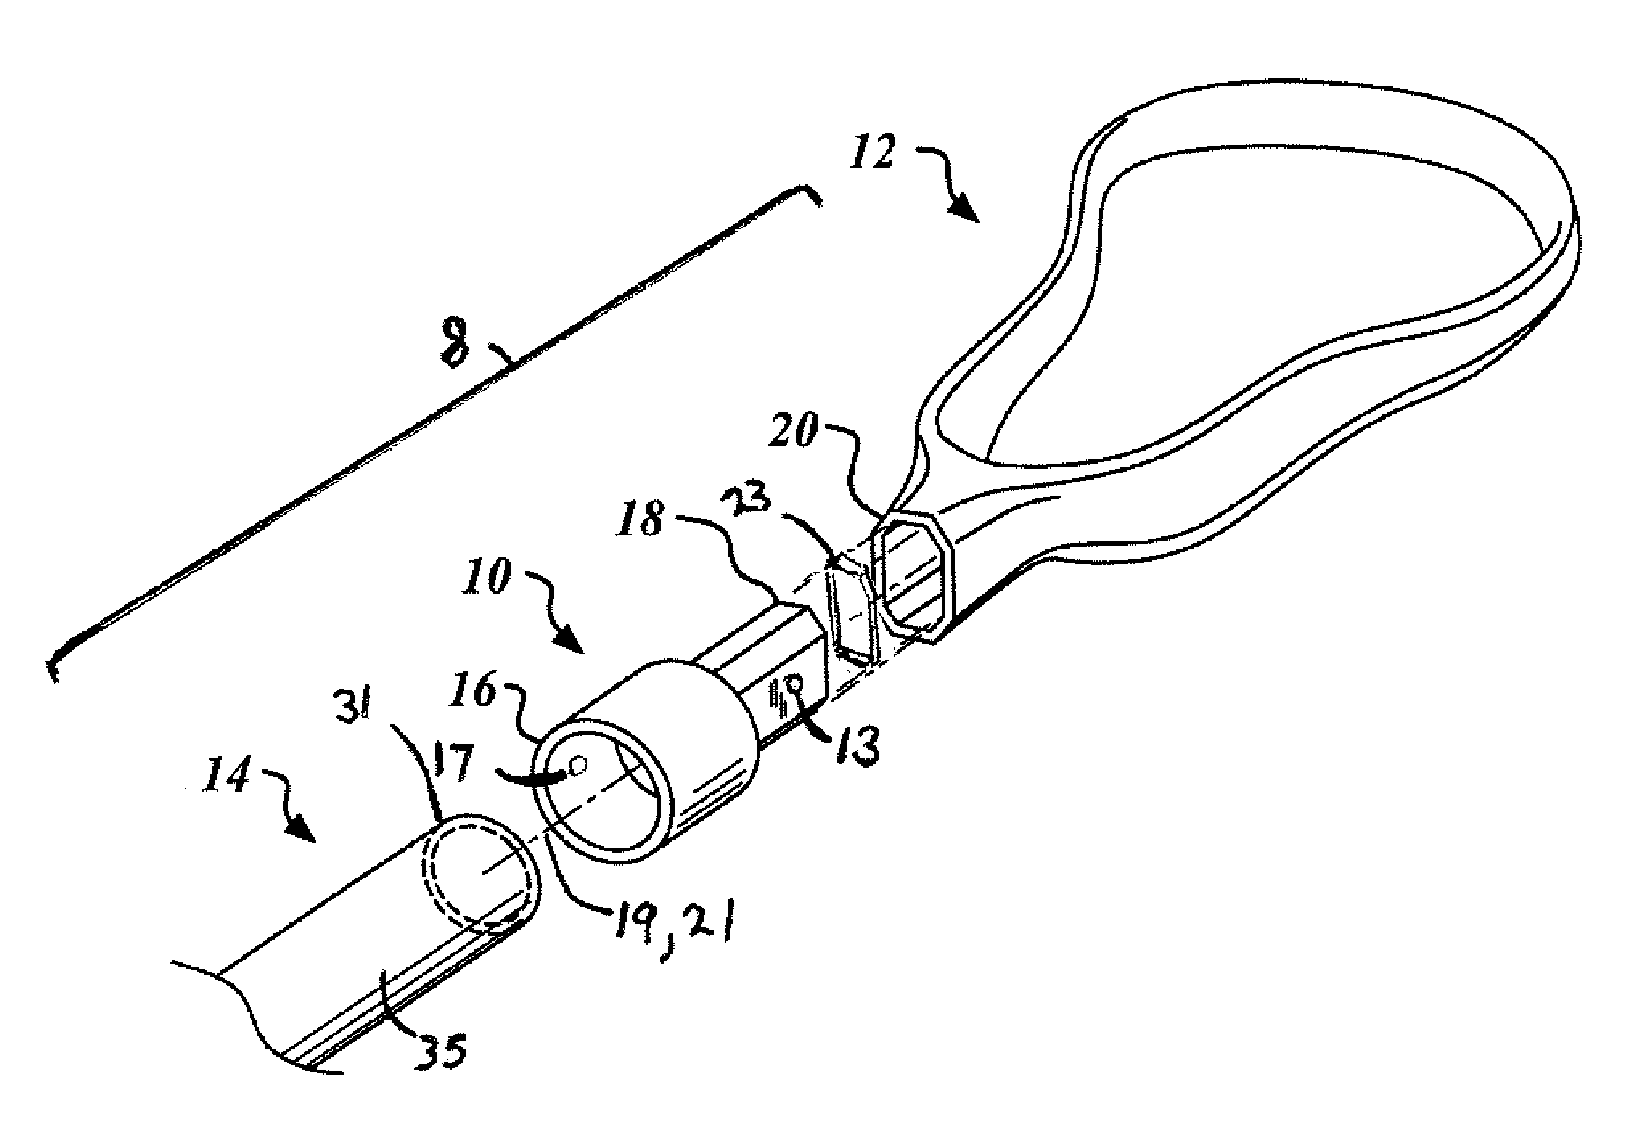 A coupling for attaching a lacrosse head to a lacrosse handle